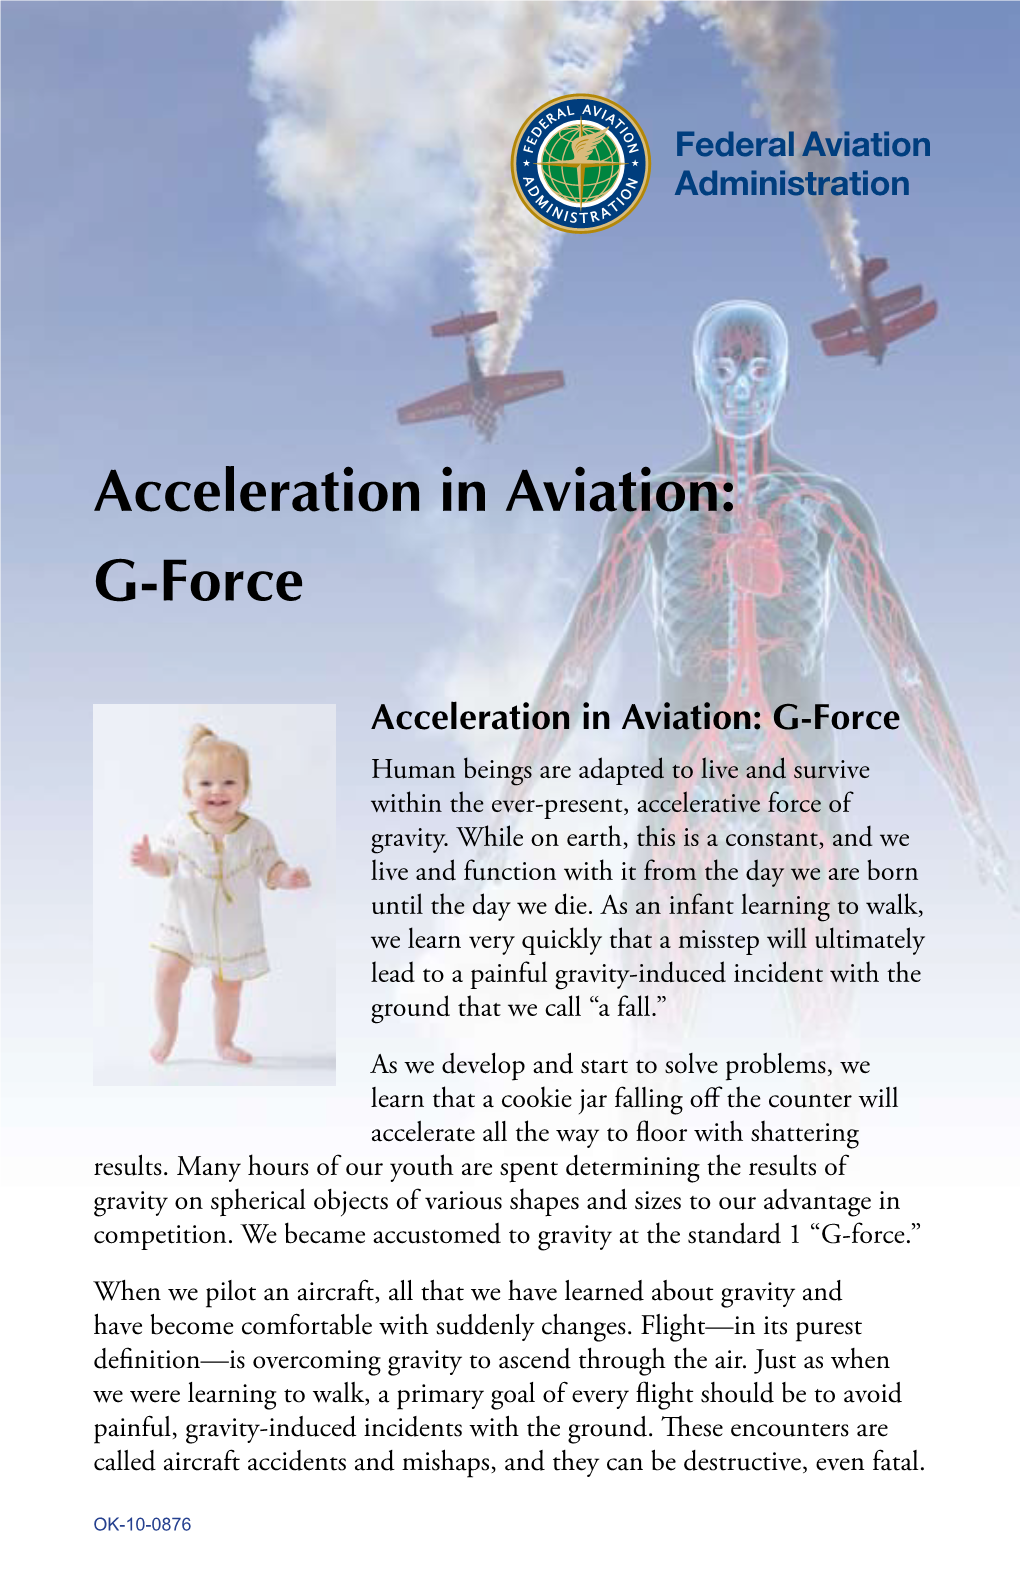 Acceleration in Aviation: G-Force